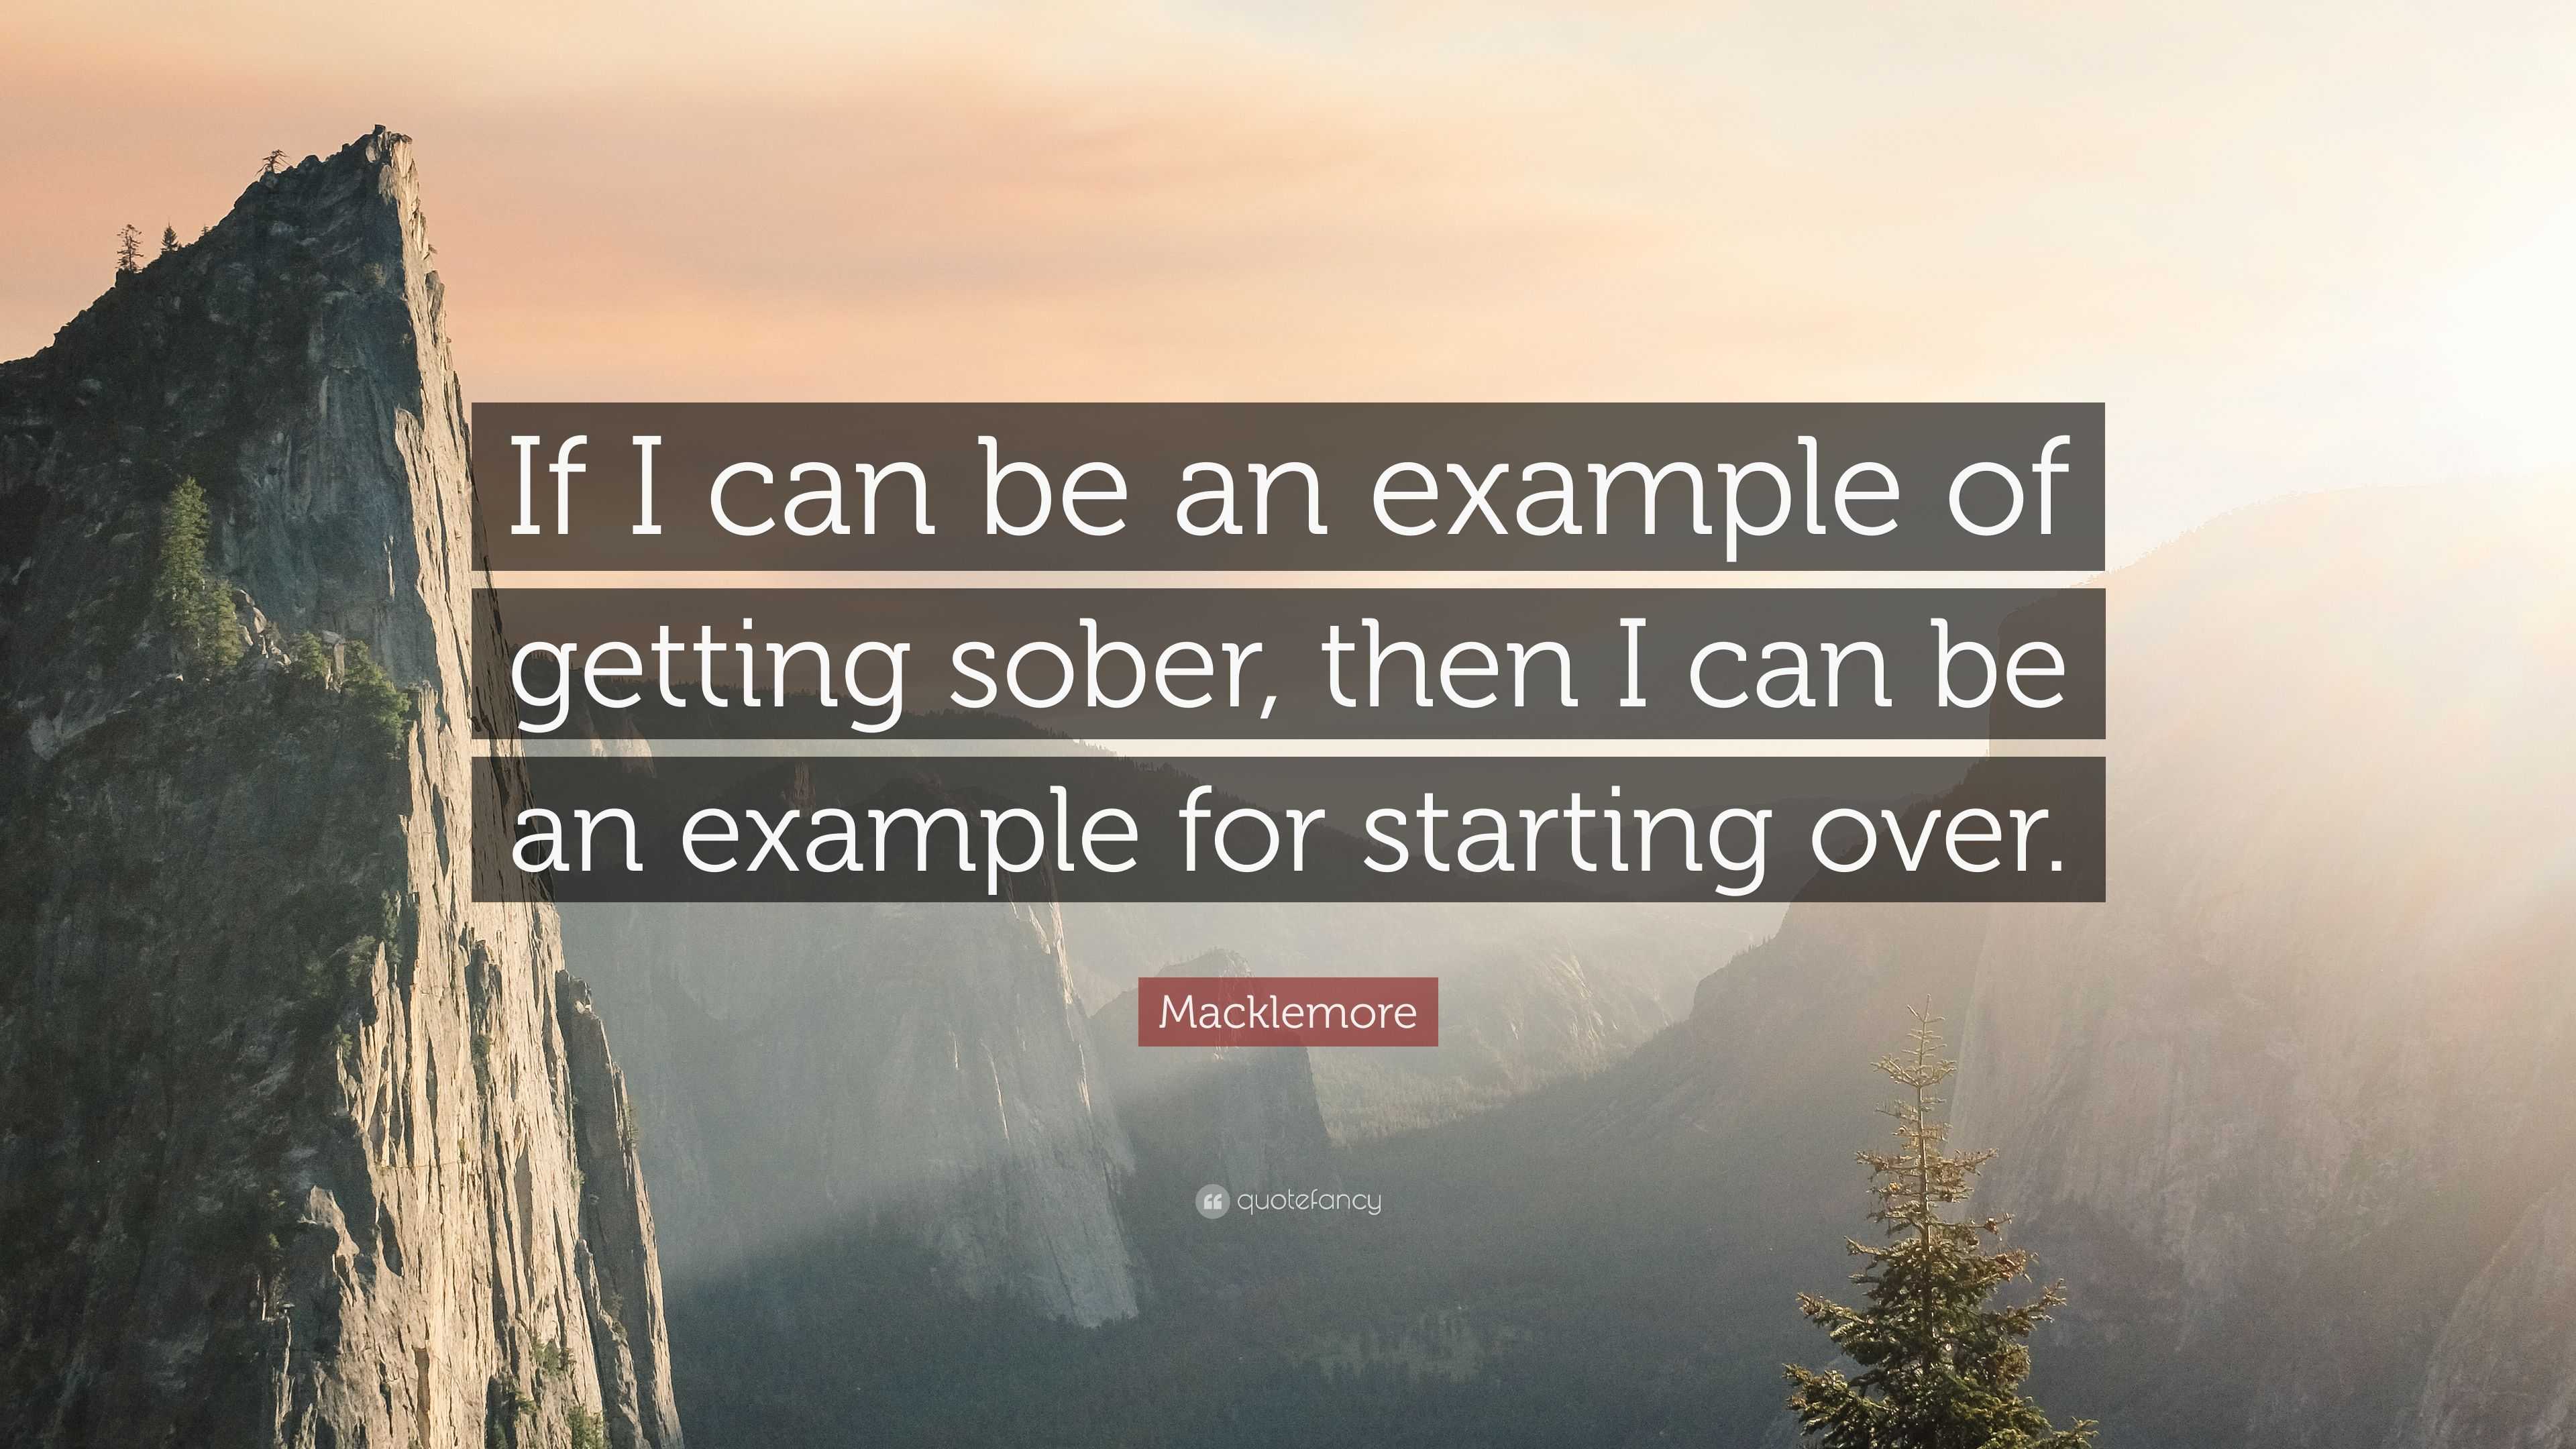 if i can be an example of getting sober